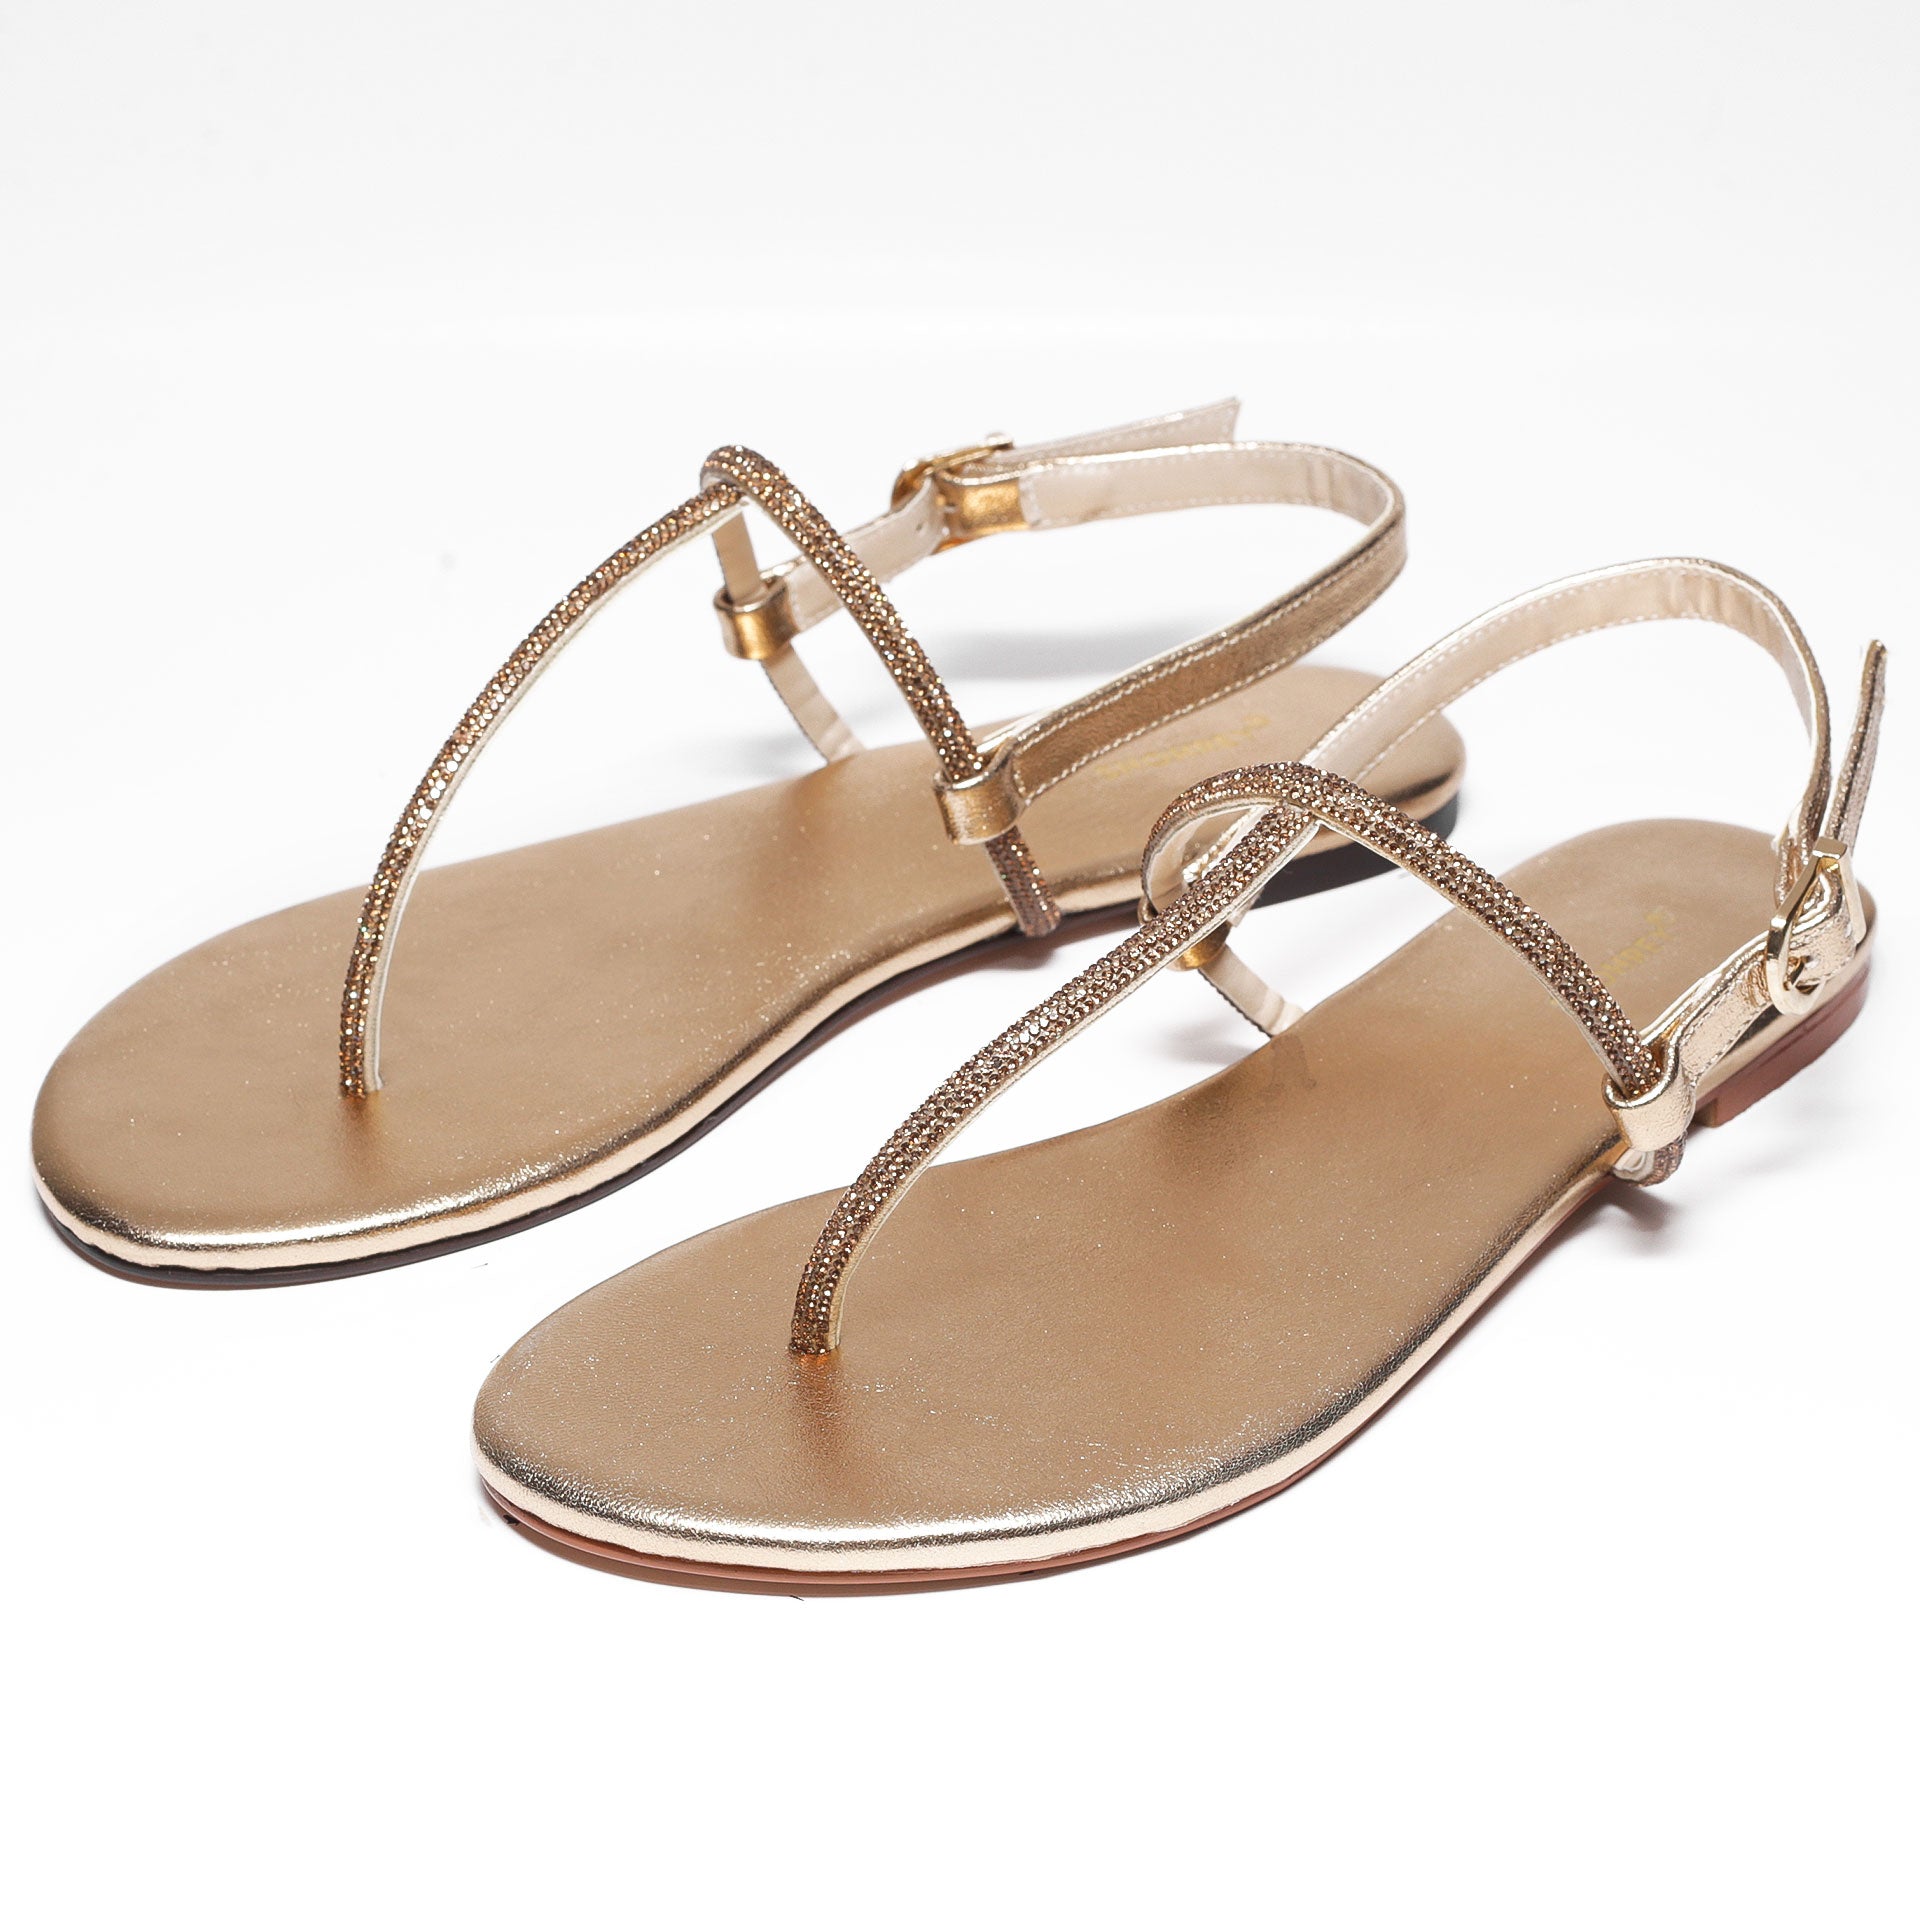 SOLETRADER - Iconic British brand Paul Smith delivers sophistication and  style with their range of Nemean slippers that have a comfortable footbed  and luxe suede material finish. #solesearching #loungeedit #cosynights  #designerslippers https://www ...